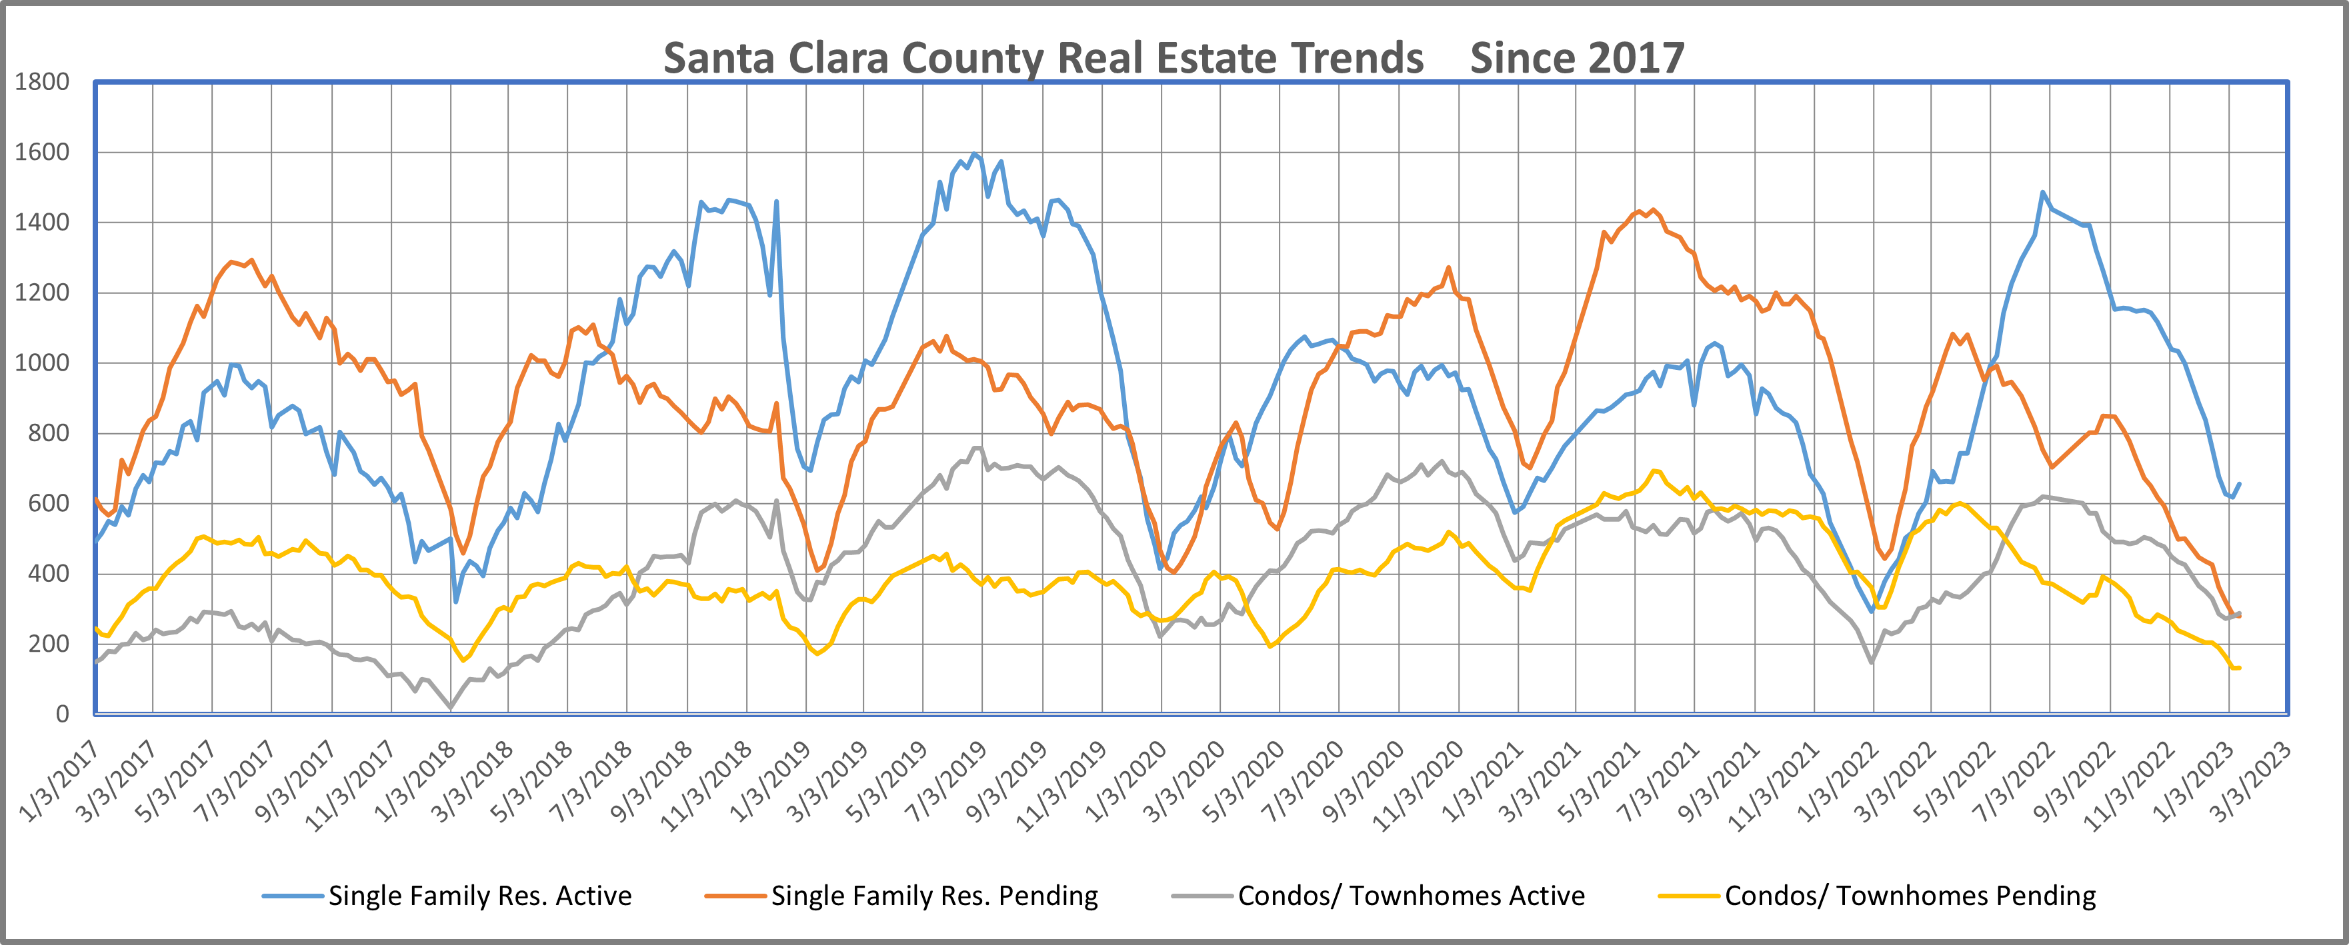 Santa Clara County Real Estate Trends Since 2017 to 2023